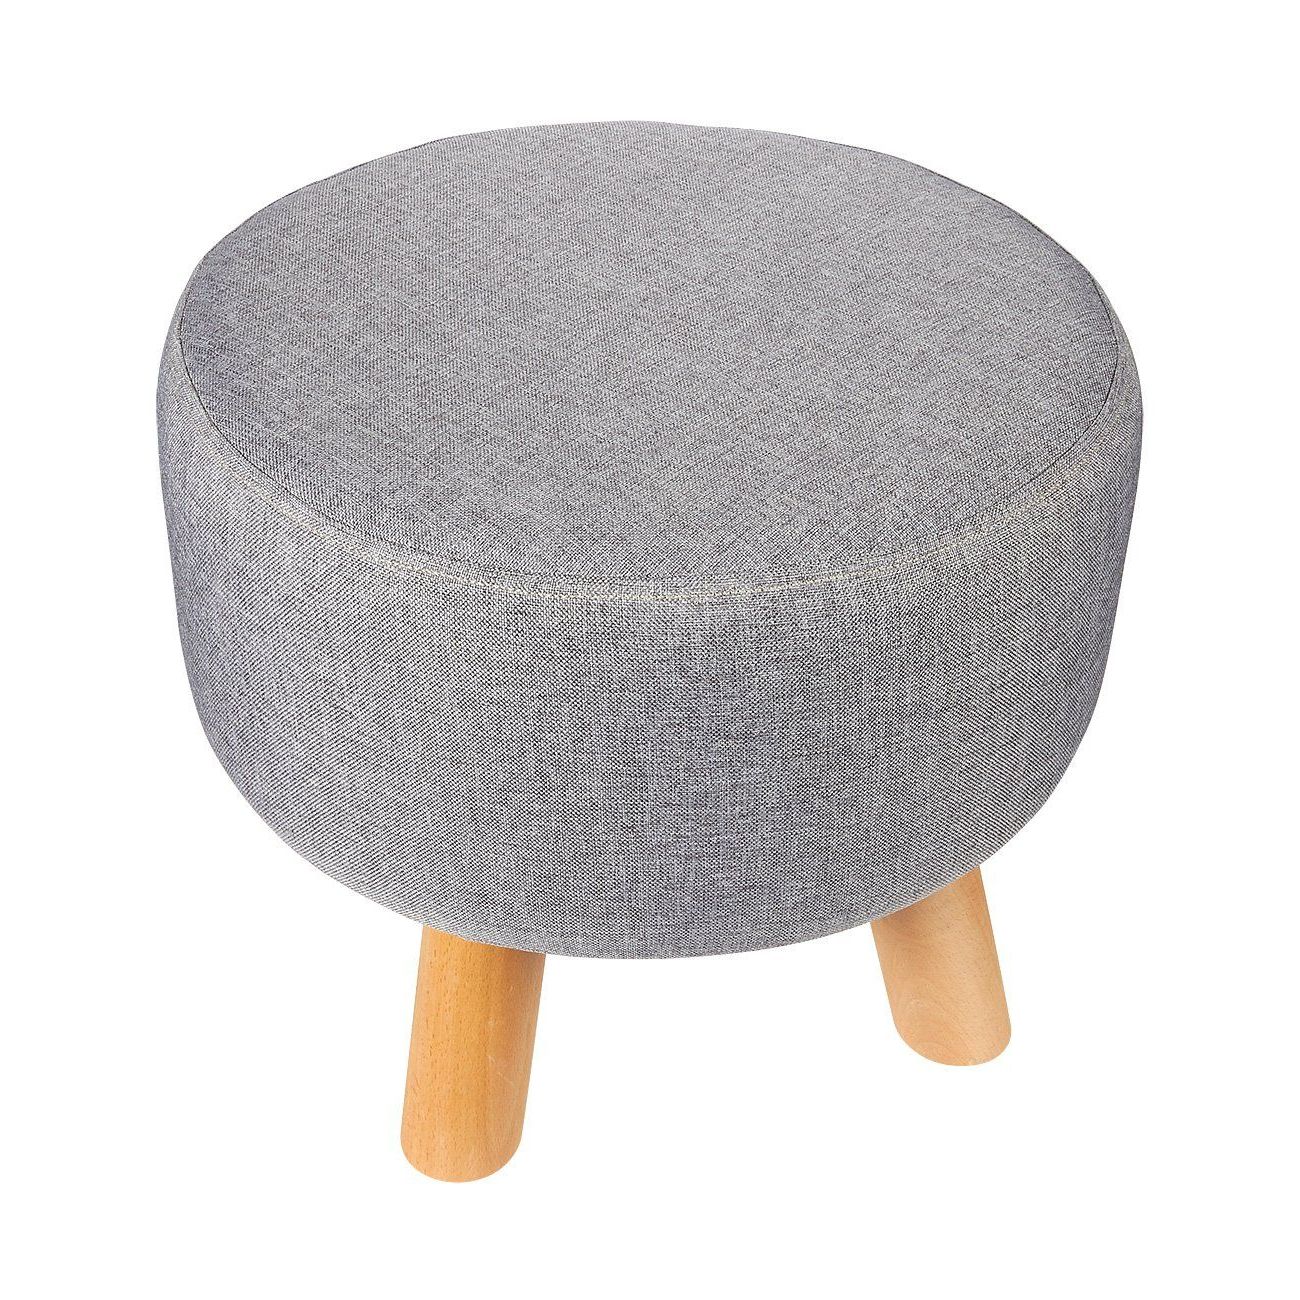 Ottoman Footstool Round Pouf Ottoman Foot Stool Foot Rest With For Well Known Cream Linen And Fir Wood Round Ottomans (View 2 of 10)